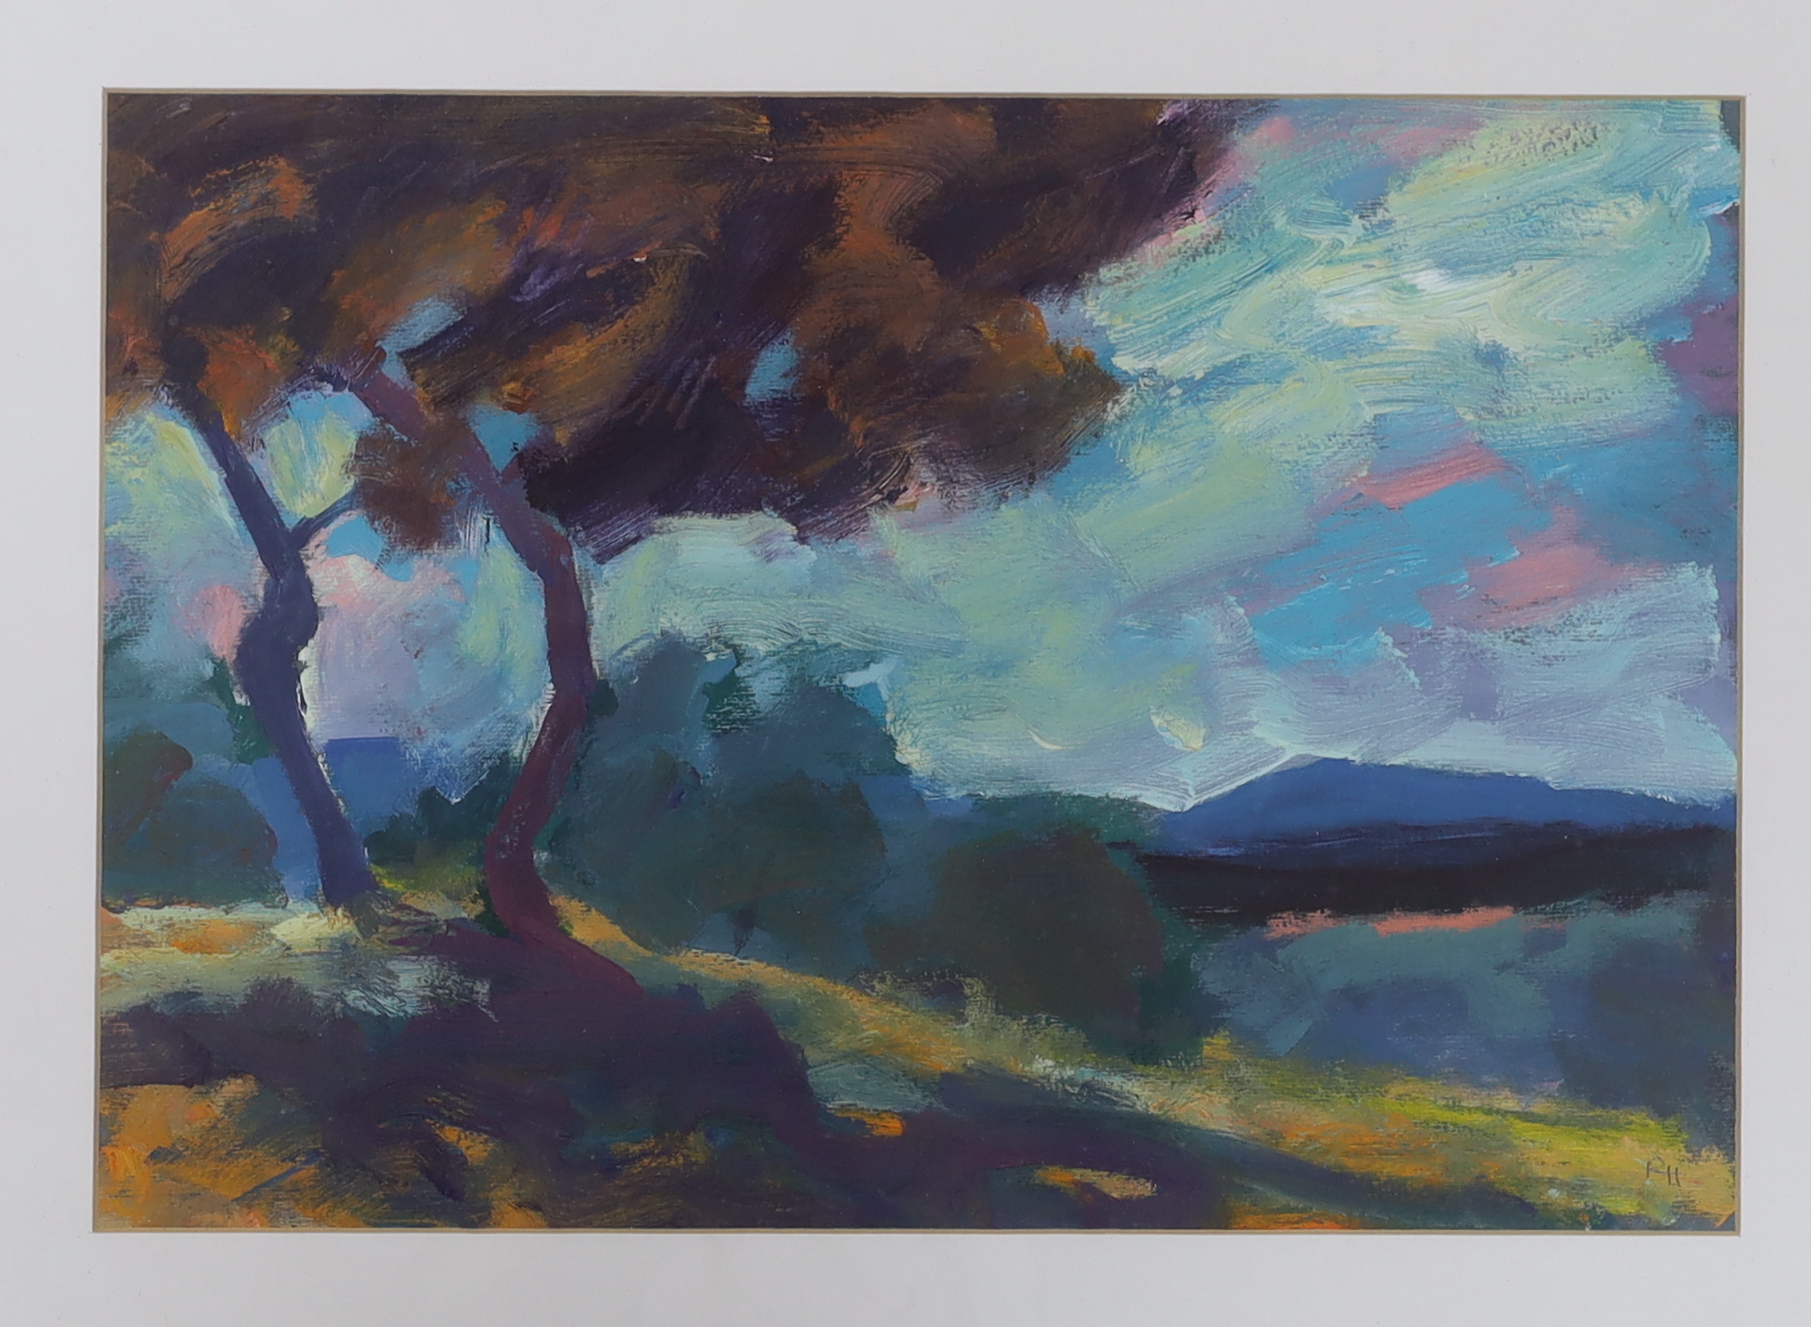 Robin Holtom (b.1944), oil on paper, Trees in a landscape, initialled, Star Gallery of Lewes 2004 Exhibition label verso, 23 x 33cm